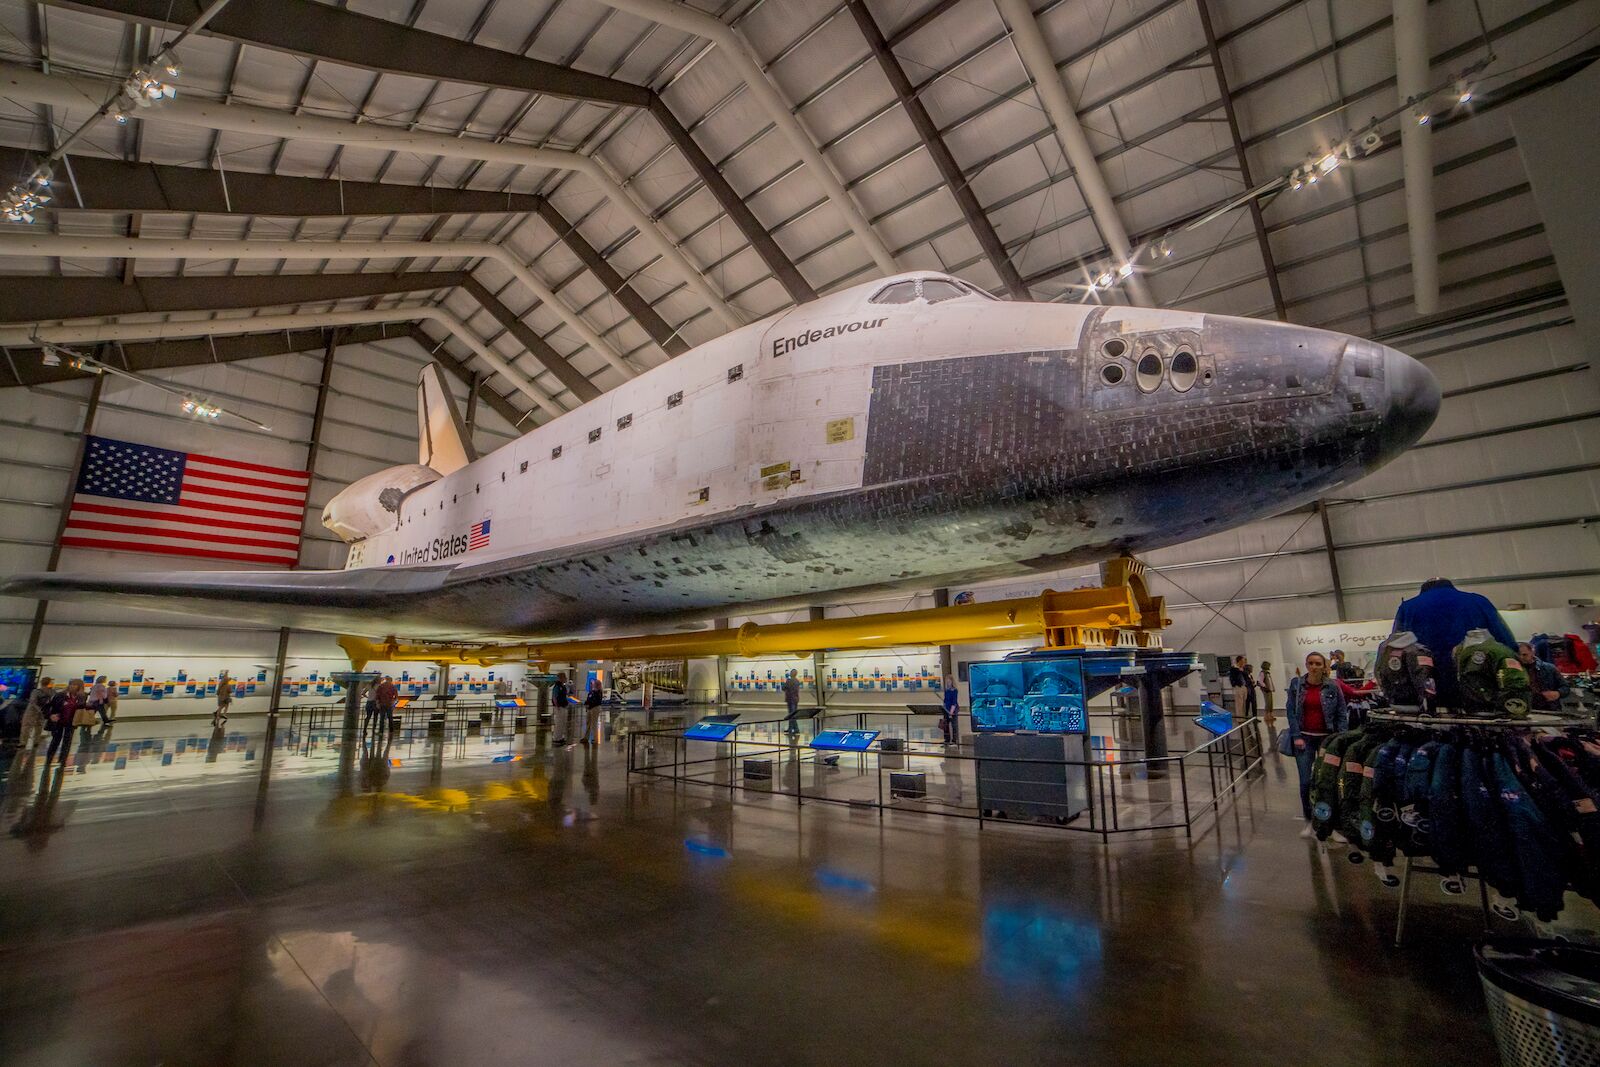 Space shuttle Endeavor on display at the California Science Center